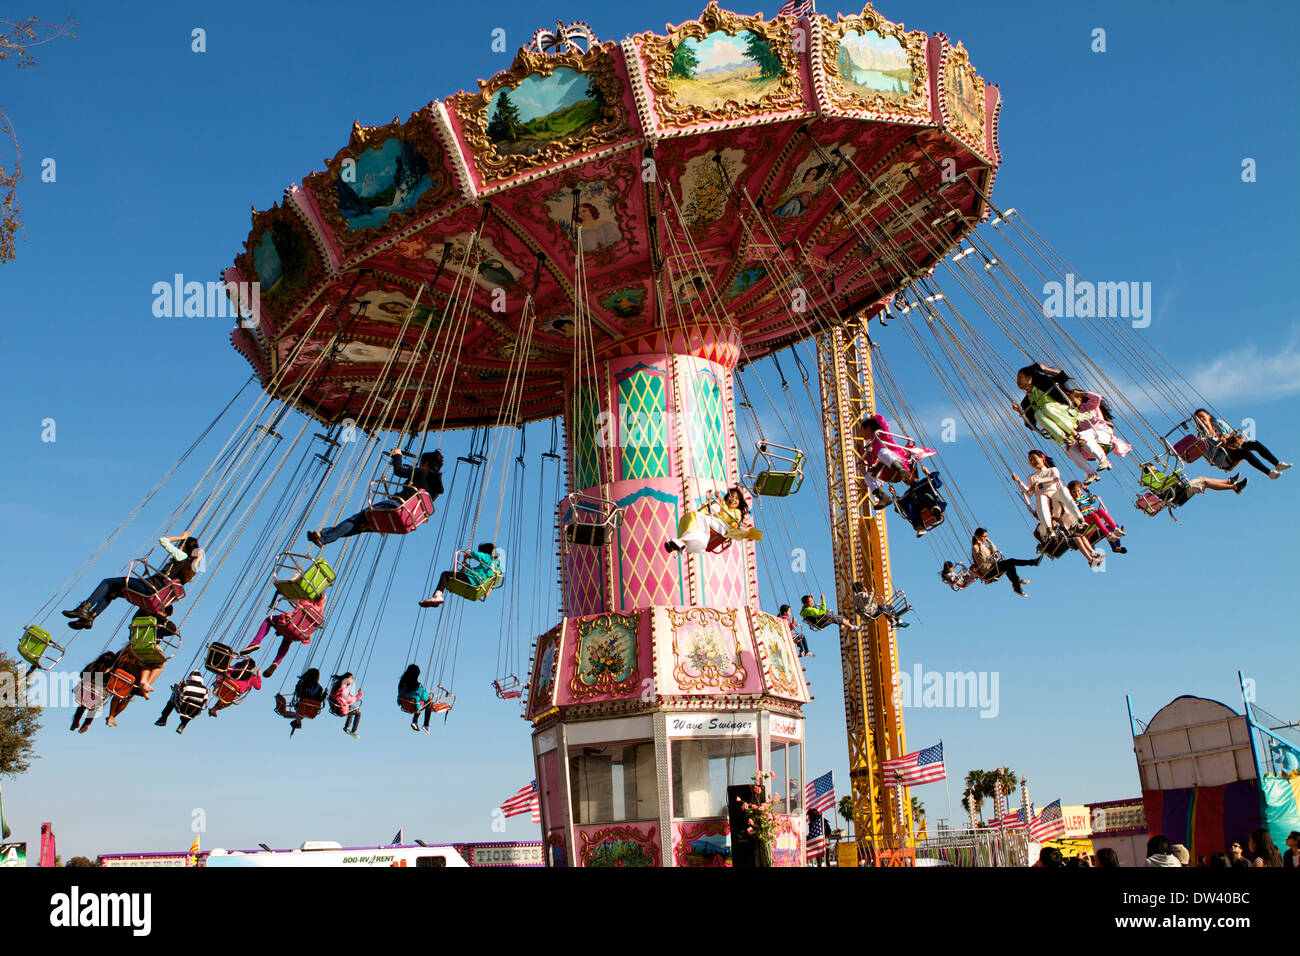 Young Children ride on the wave swing at the Orange County fair grounds during the Vietnamese Tet Festival Stock Photo